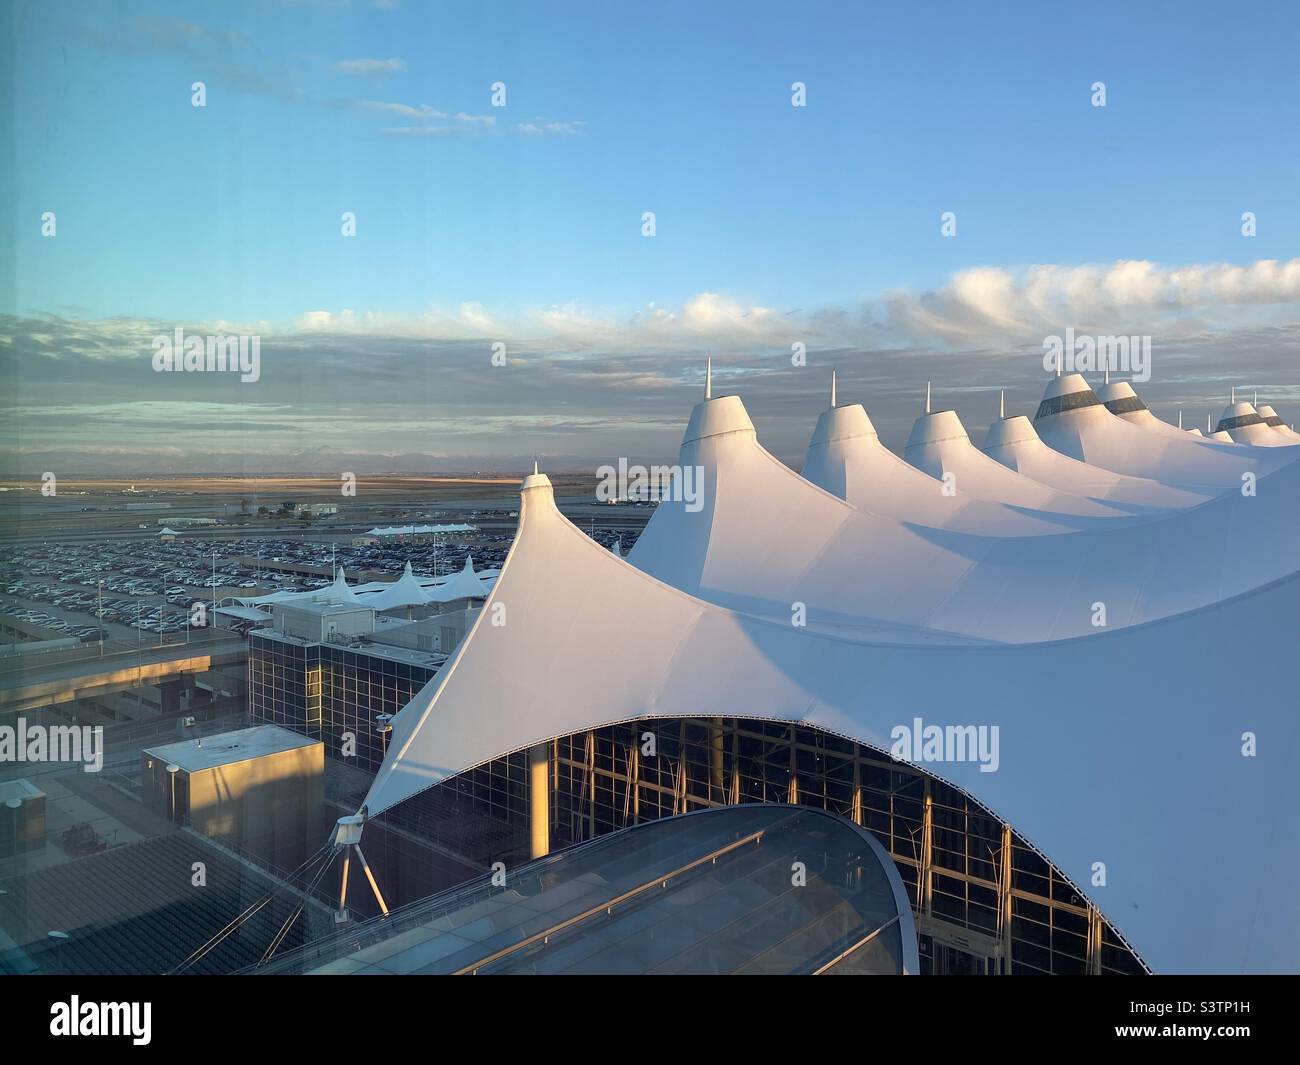 The tents over the Denver International Airport Terminal. Stock Photo